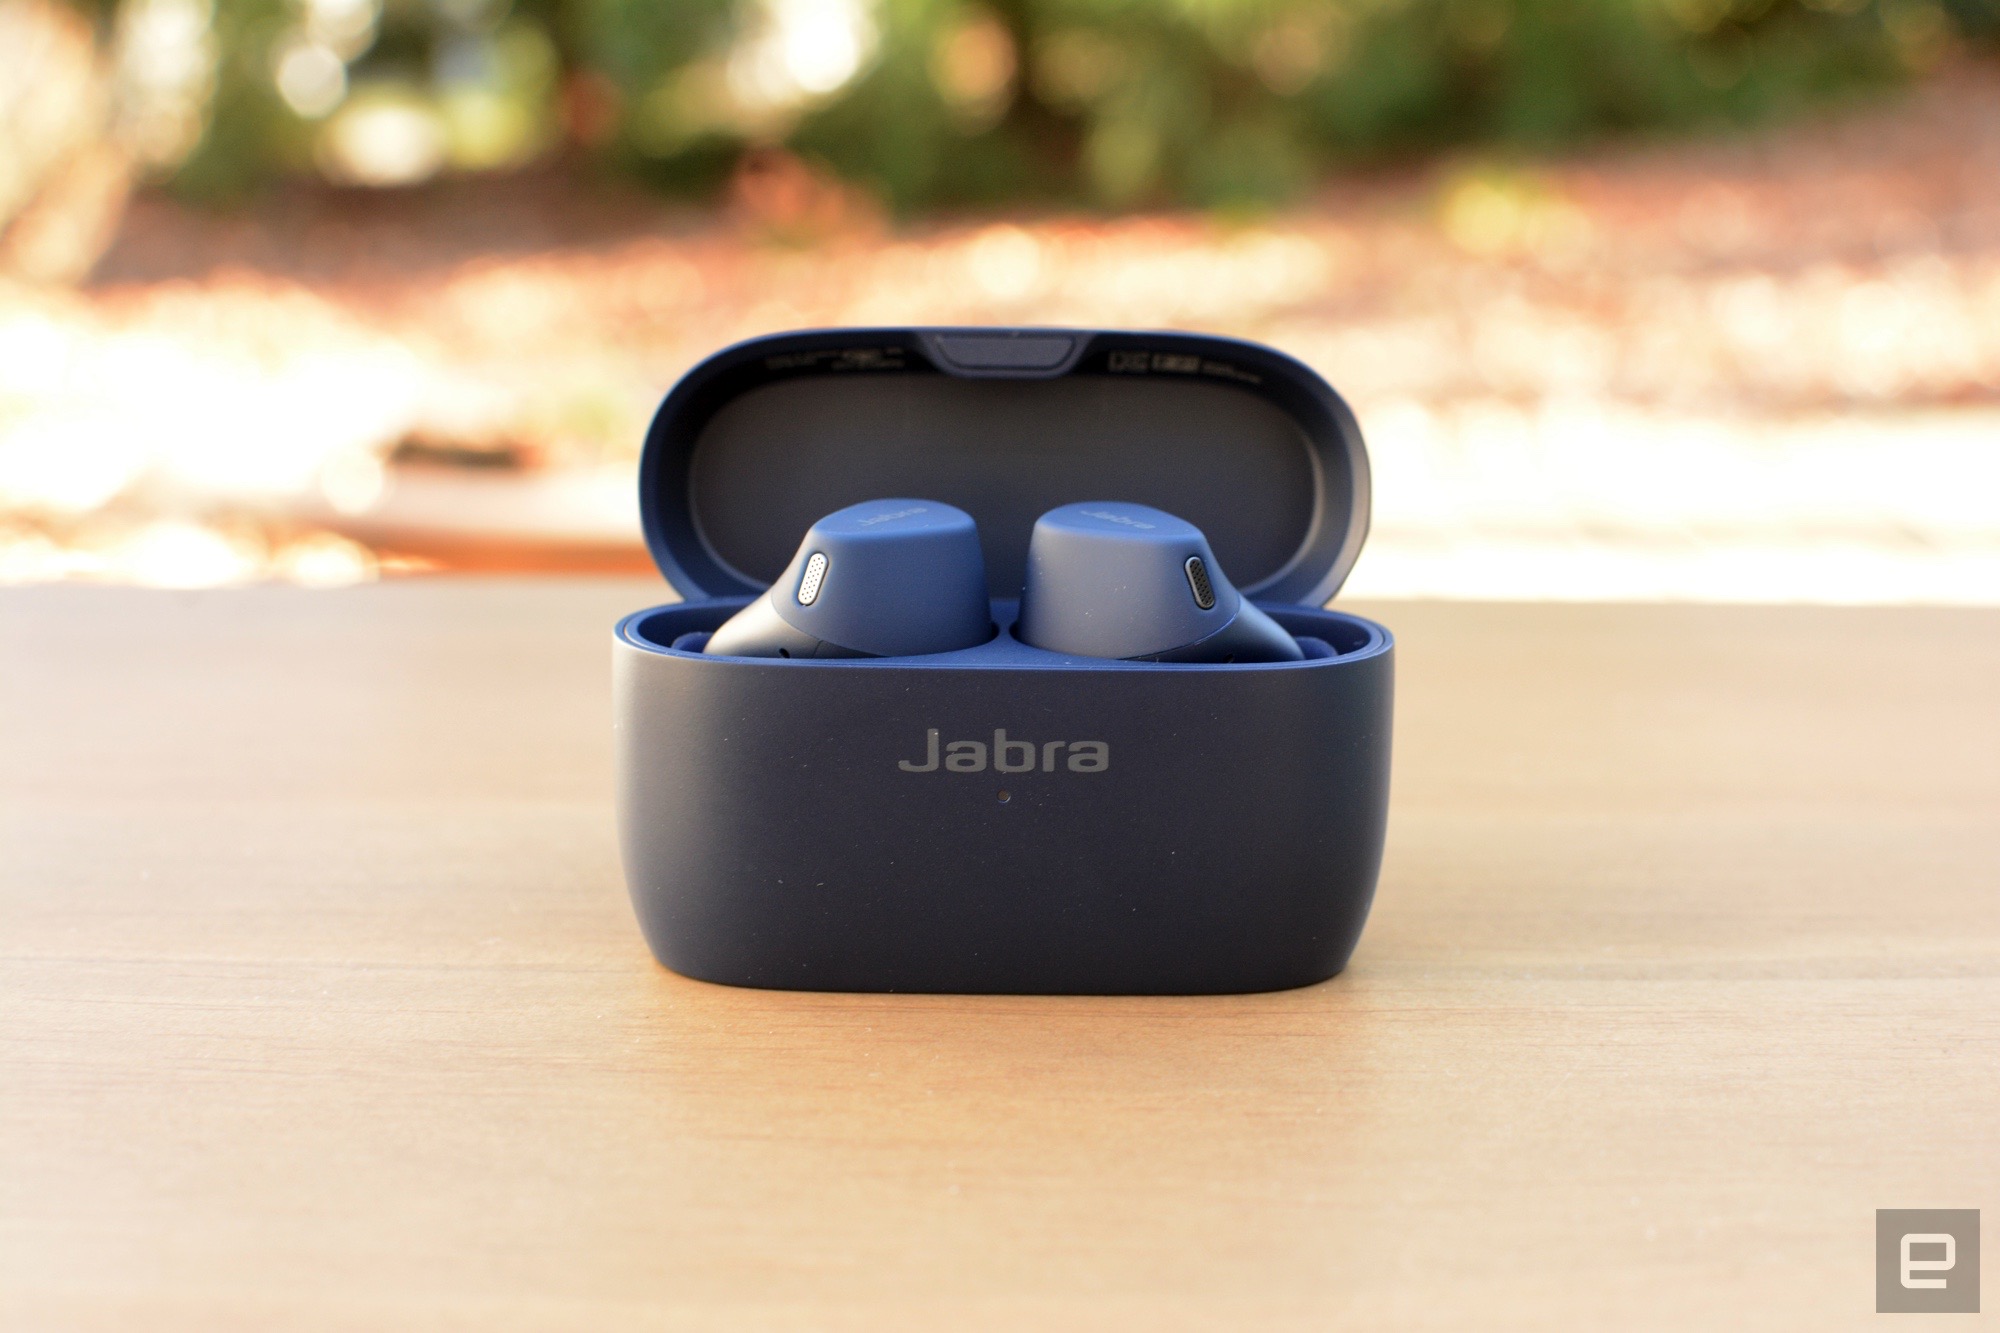 <p>Jabra continues to revamp its true wireless lineup with compelling options at affordable prices. With the Elite 4 Active, you get upgrades like ANC and better water resistance over the base model Elite 3. Sound quality is good and battery life is solid, which helps make up for the lack of premium conveniences.</p>
